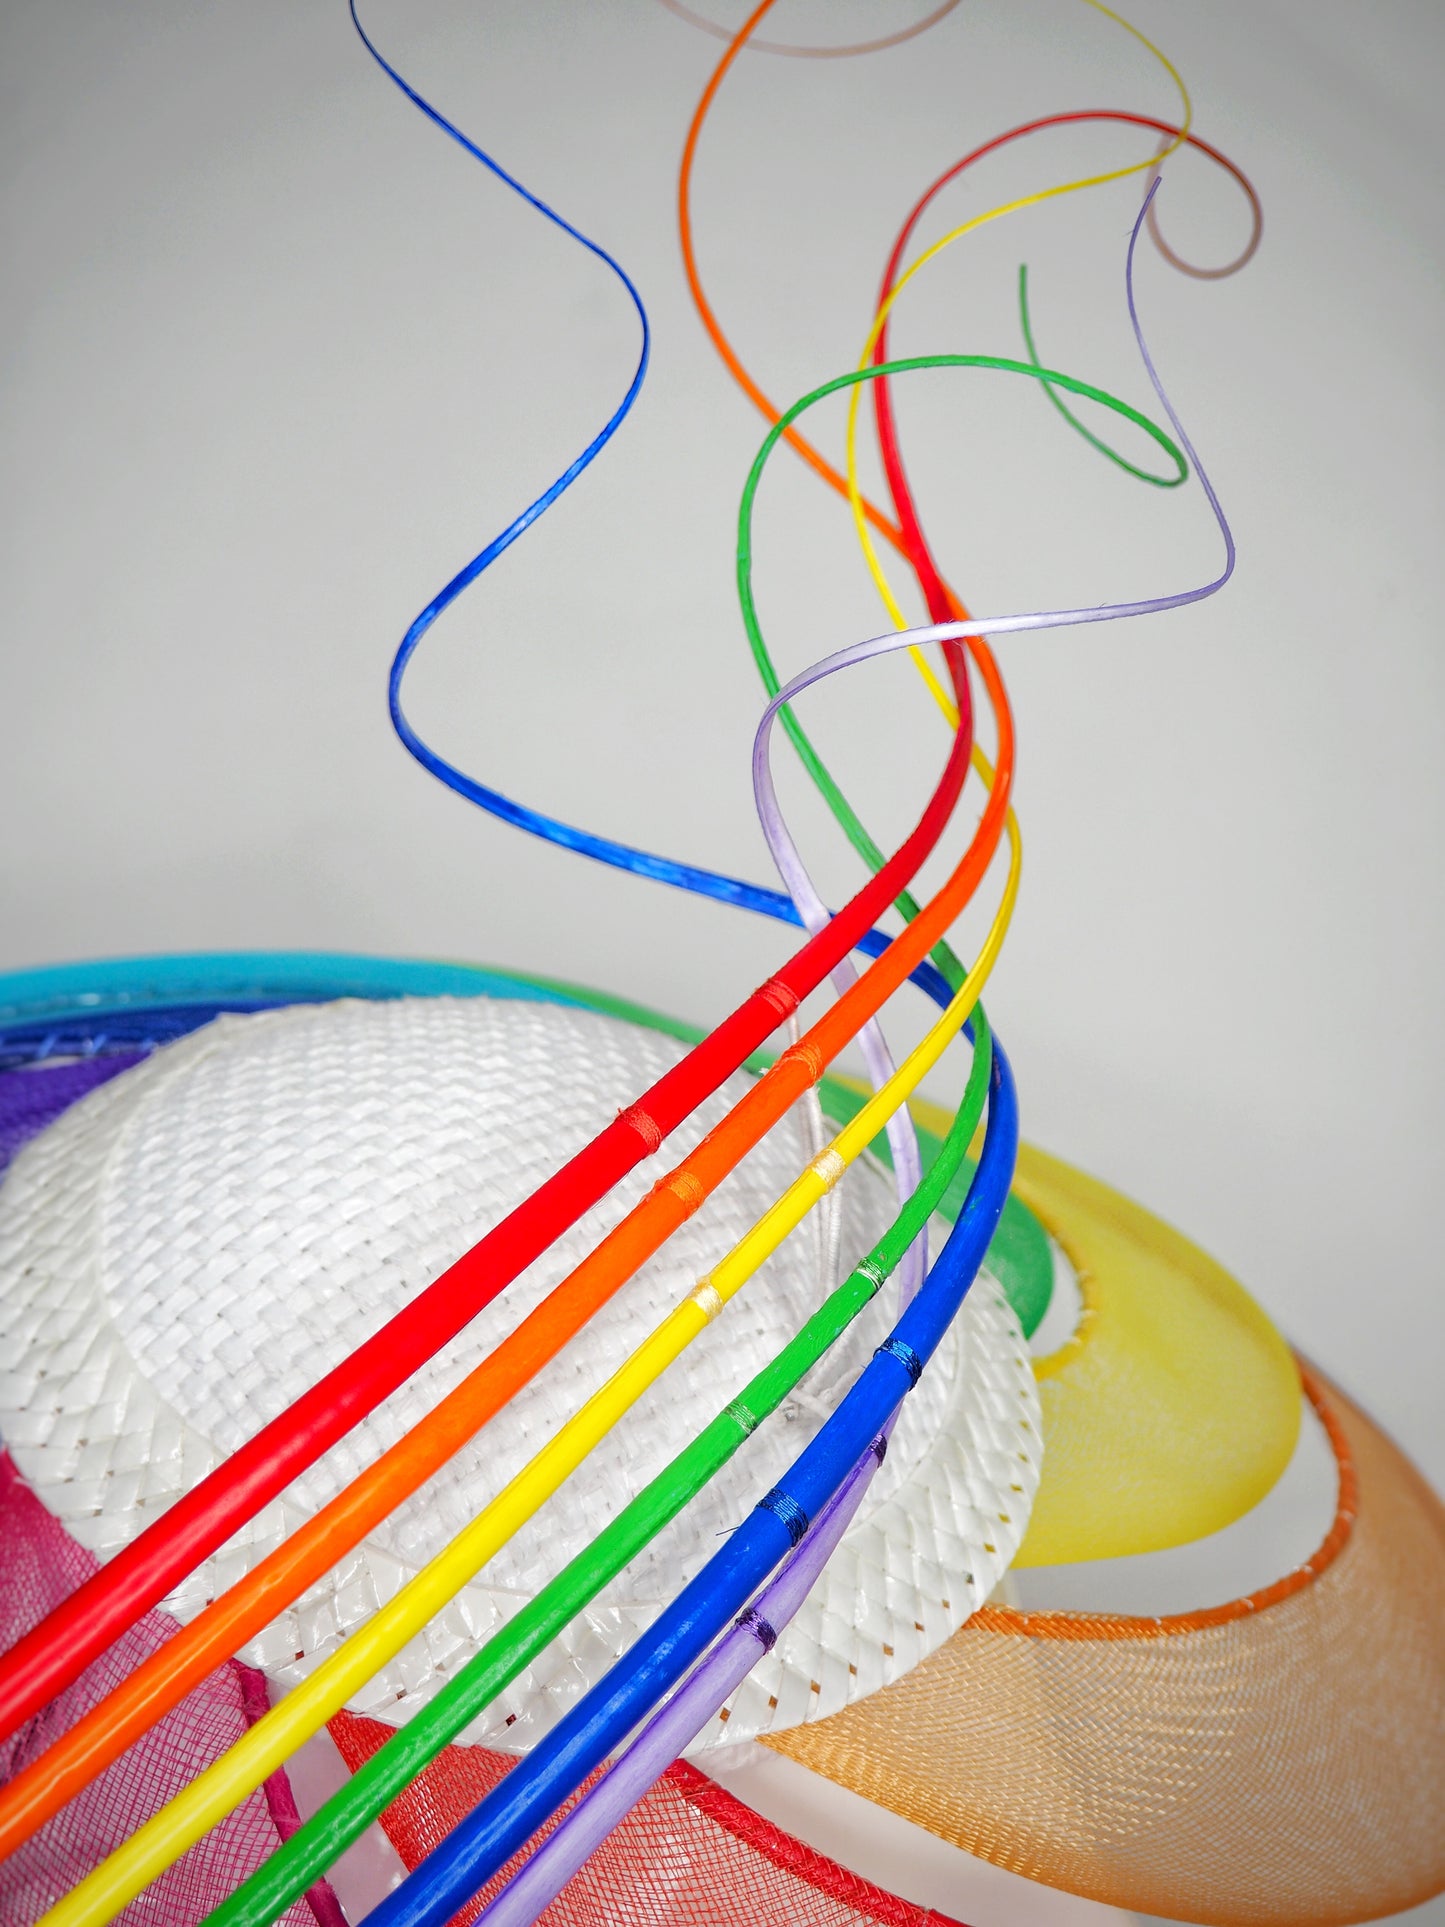 Over The Rainbow - Rainbow crinoline wired brim with textured white crown and rainbow quills.